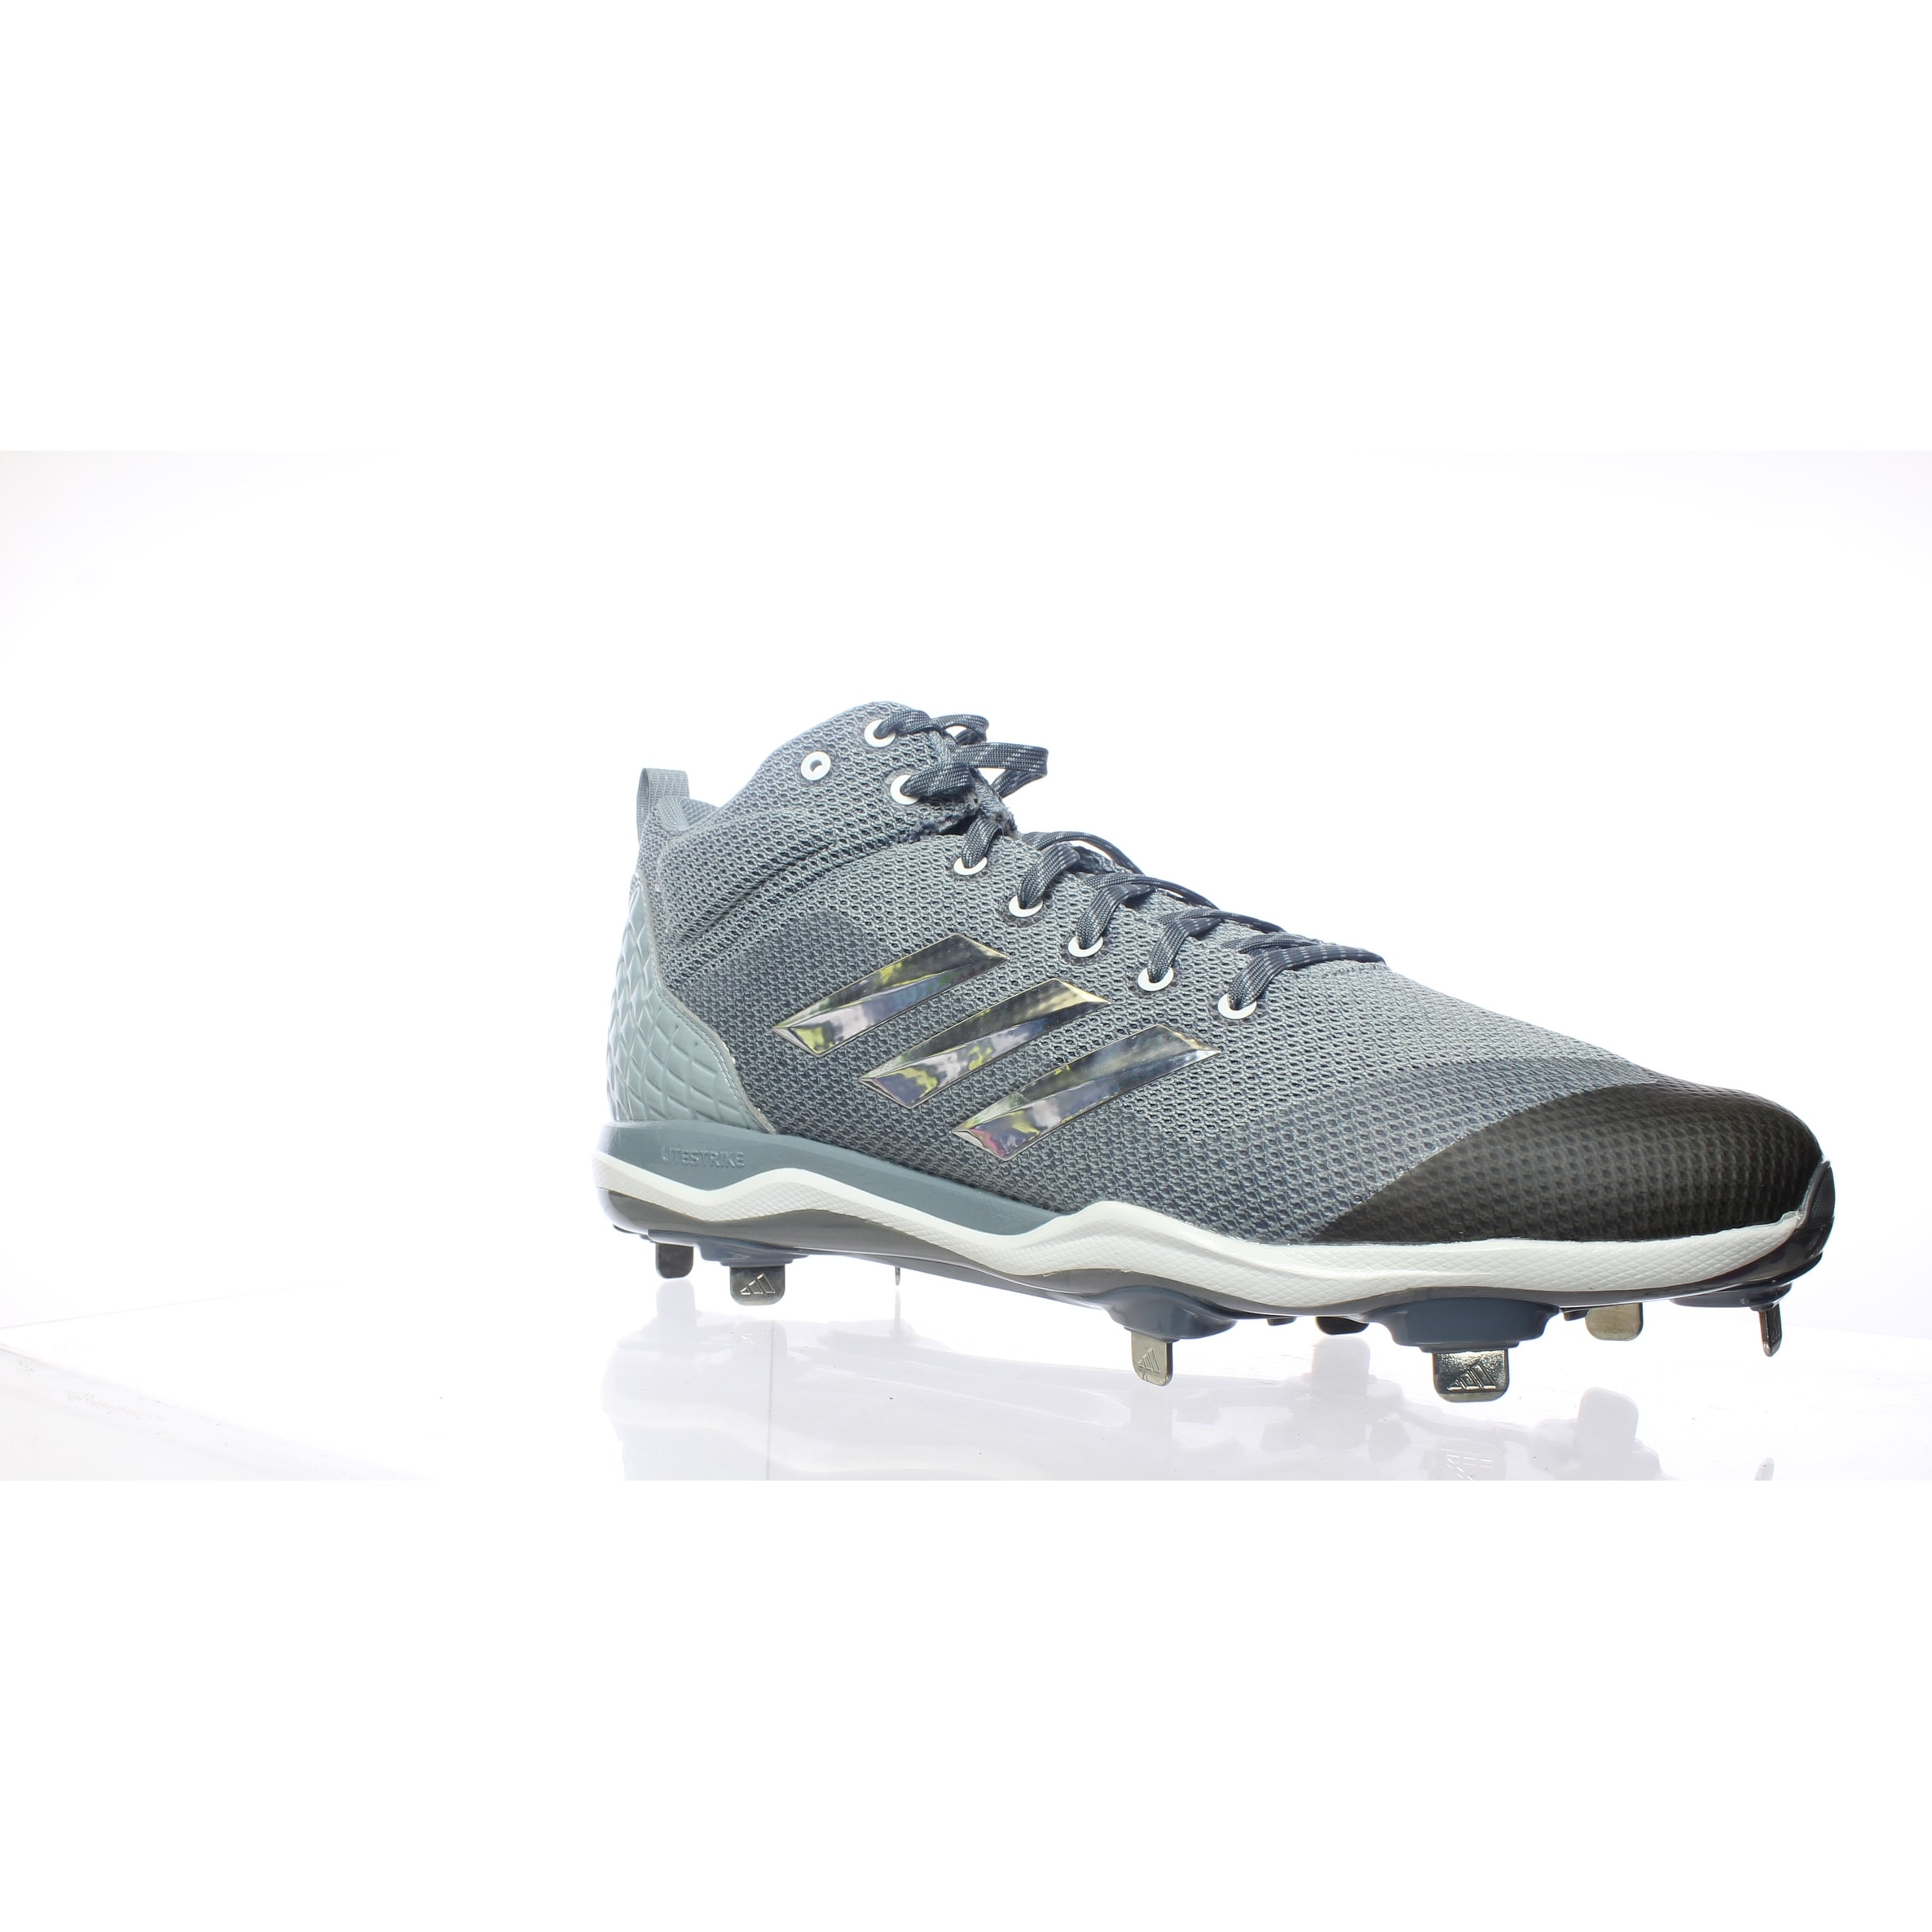 poweralley 5 cleats